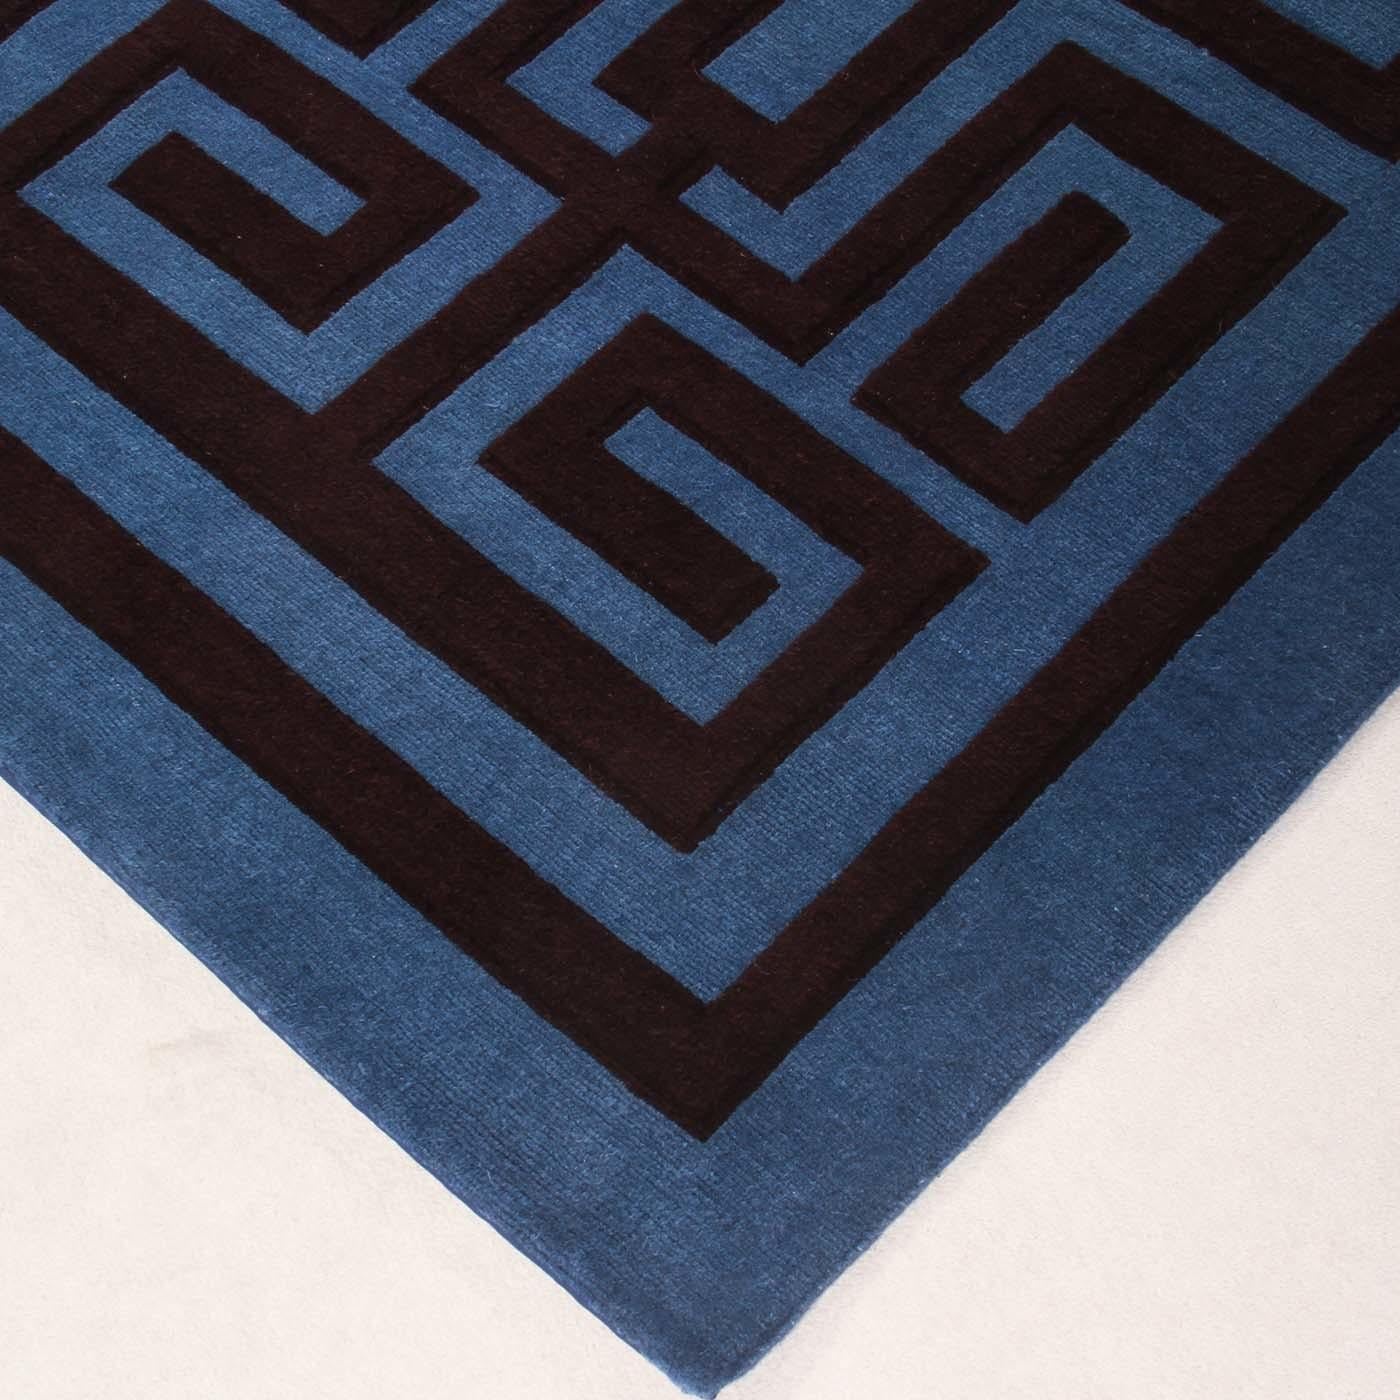 The symmetry of the pattern, the contrasts between the backgrounds, and the drawing bestow depth to the Labirinto carpet. An intriguing three-dimensional pattern originally designed by Gio Ponti to recreate a contemporary, yet classical, diamond